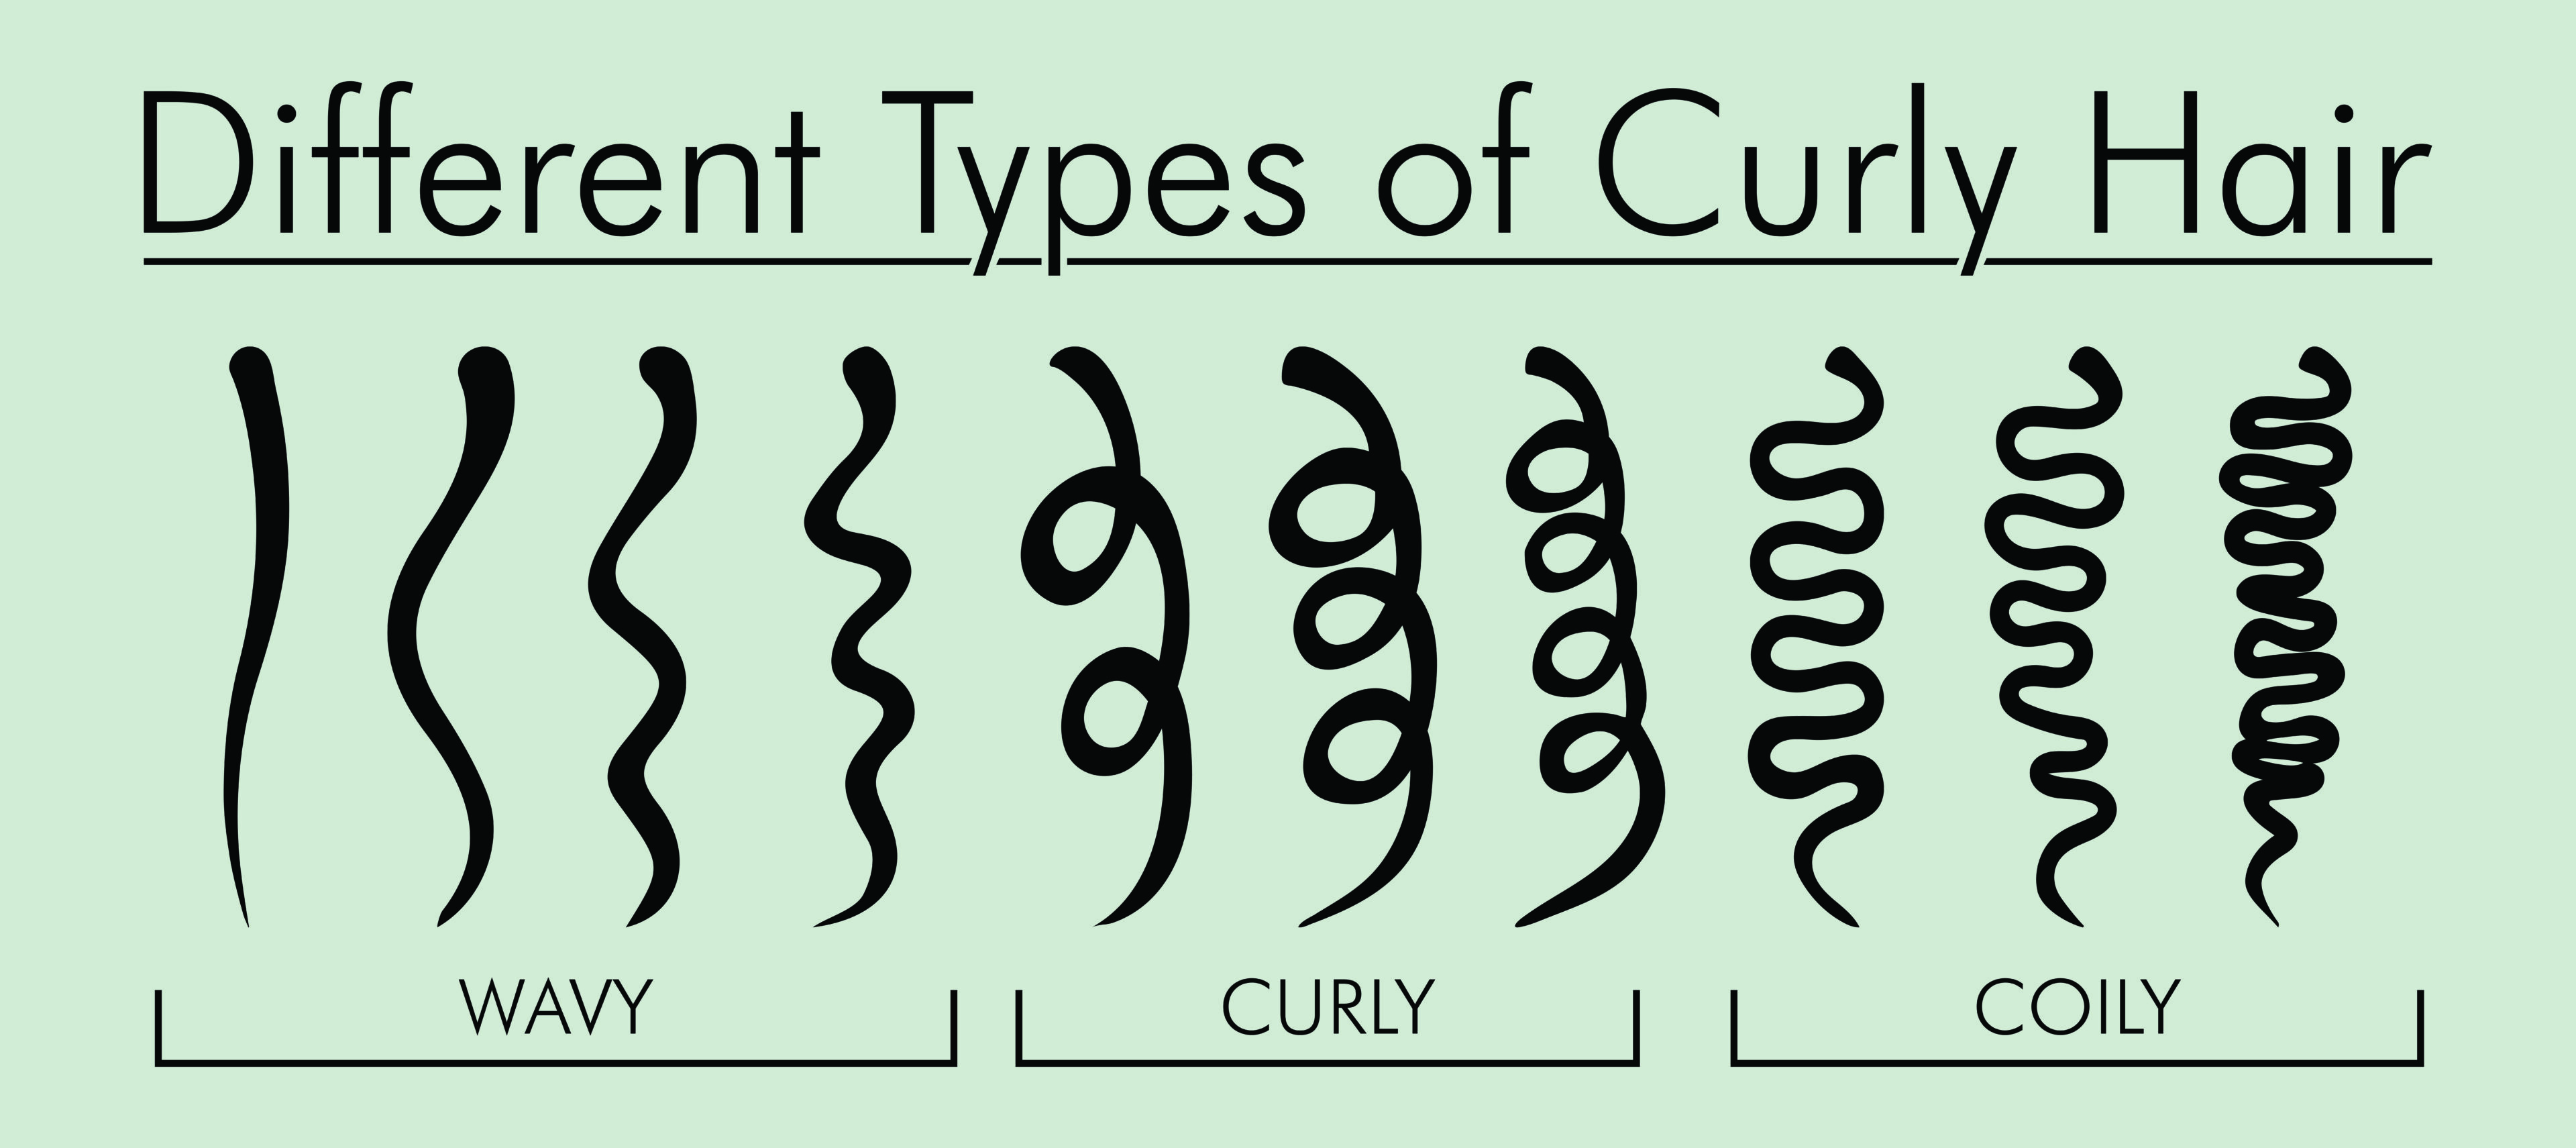 The NaturallyCurly Hair Typing System